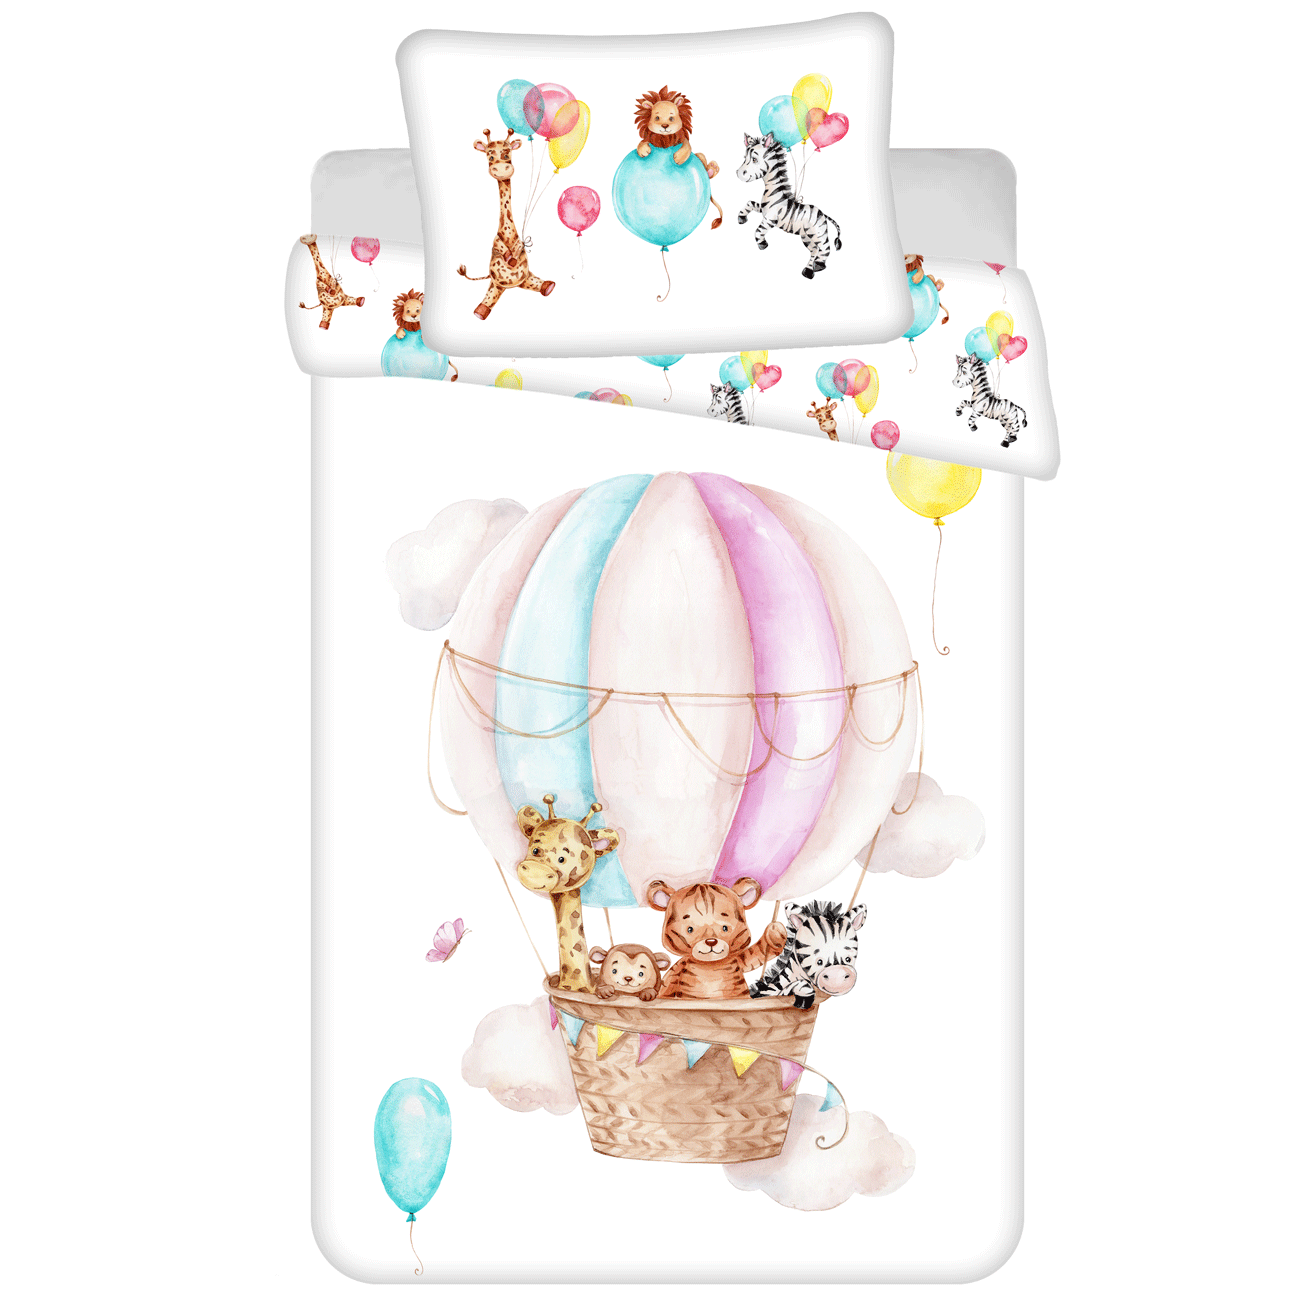 Animal Pictures BABY Duvet cover, Animal friends - 135 x 100 + 40 x 60 cm - Cotton